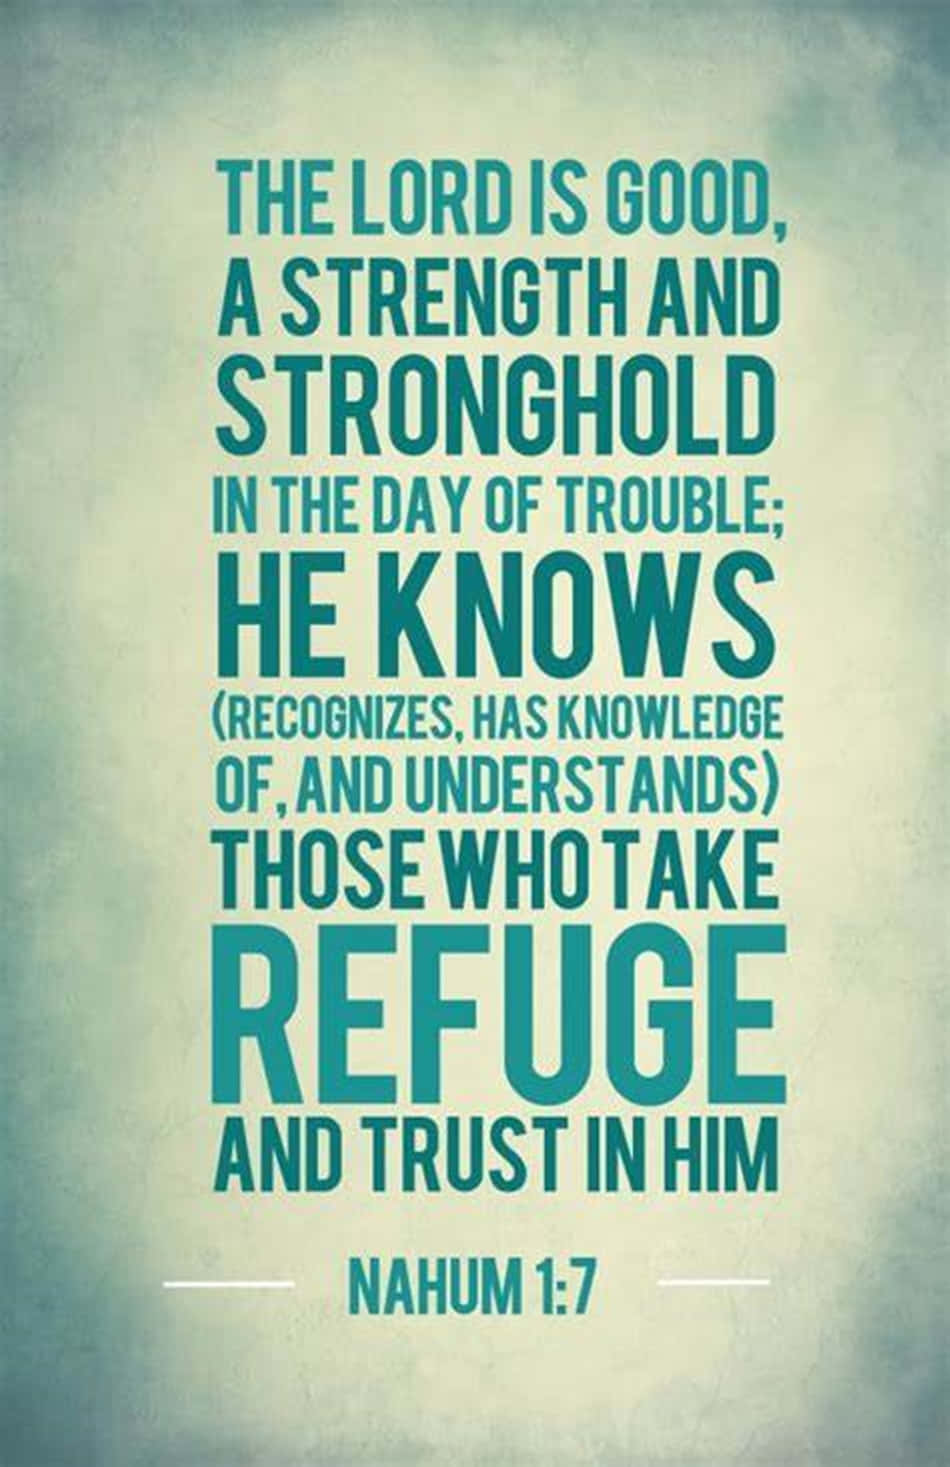 Take courage knowing your faith will sustain you during difficult times